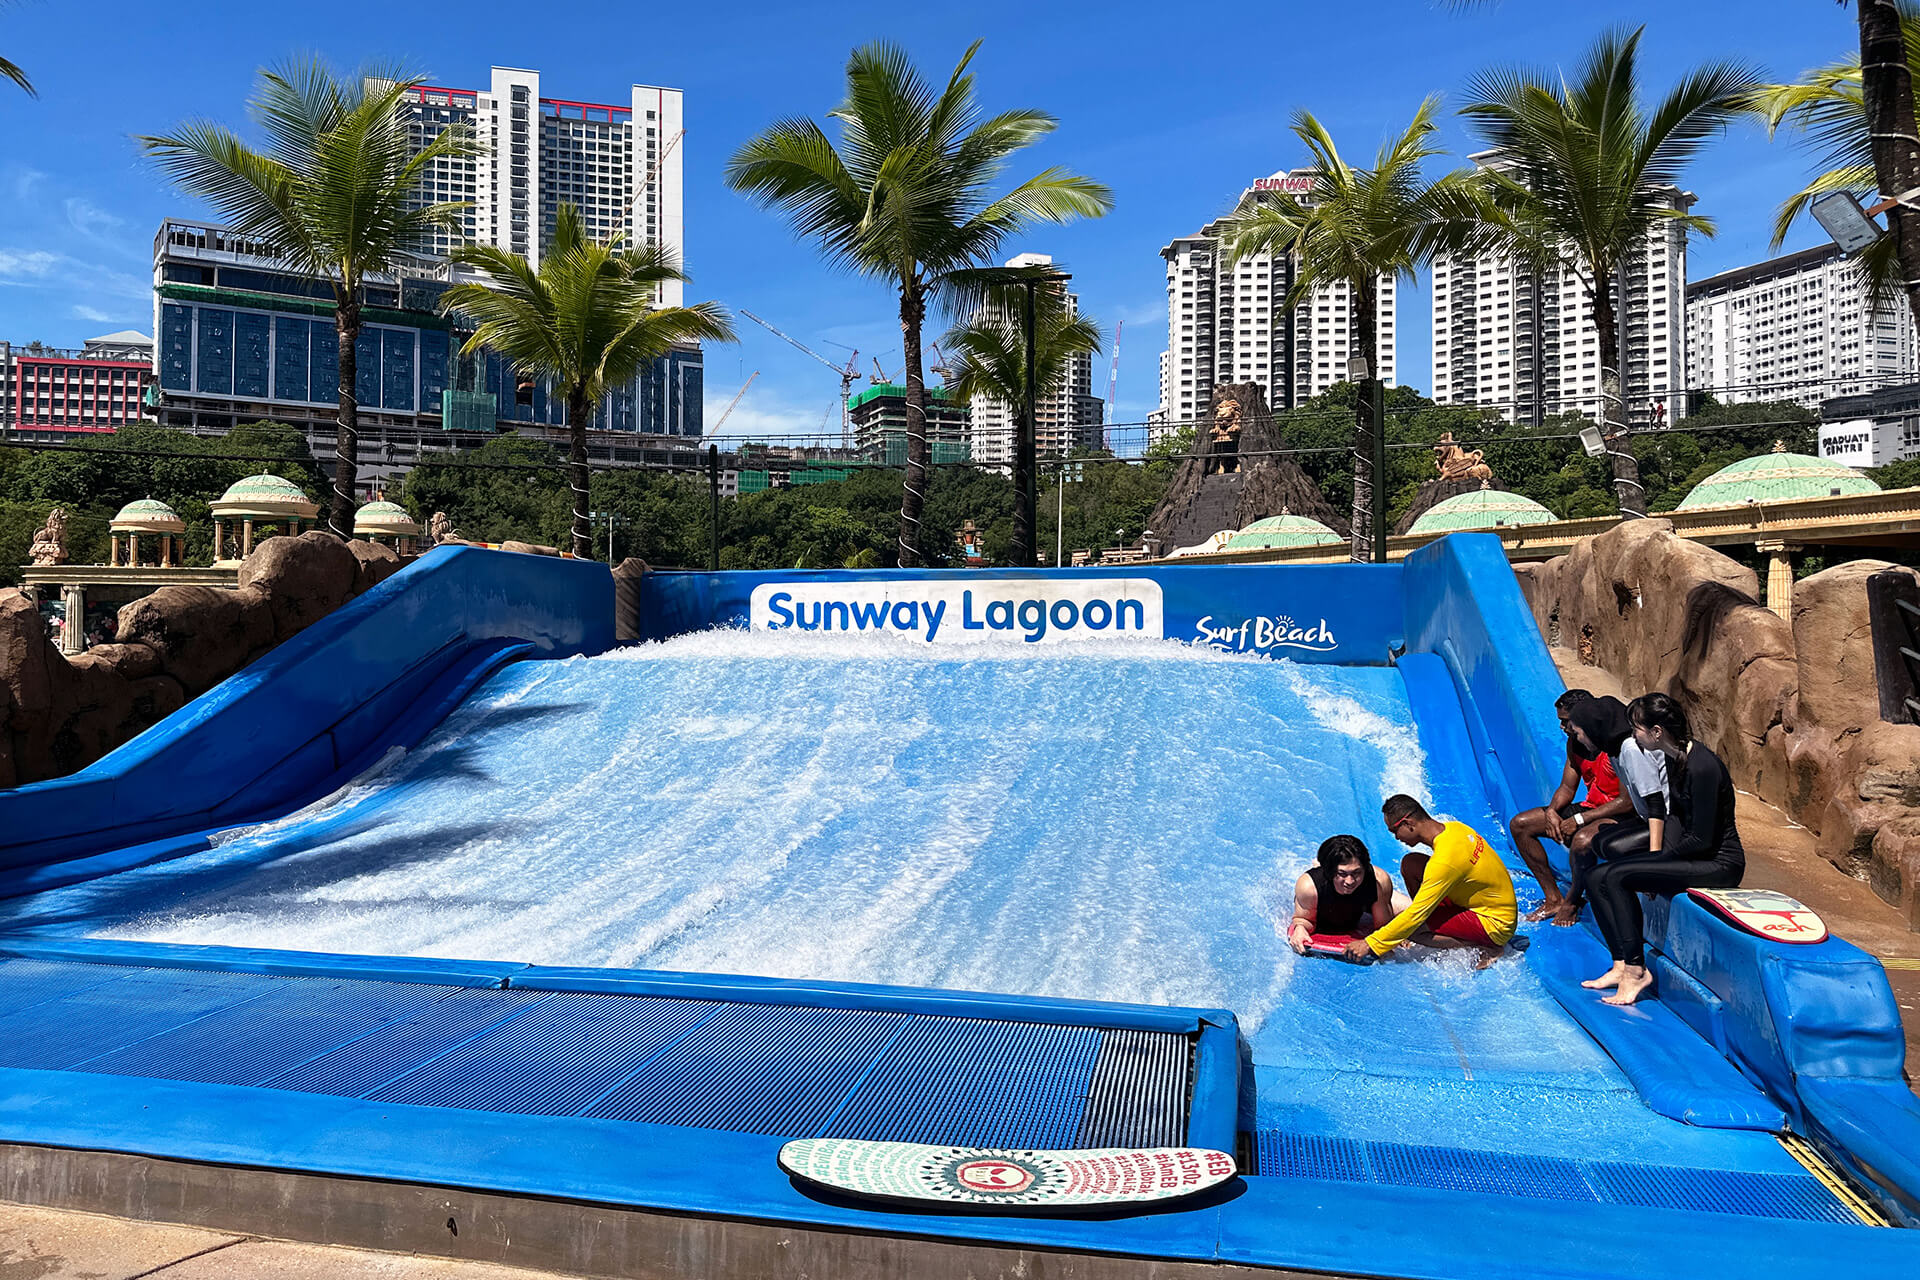 Get a taste of wave-riding at FlowRider at Sunway Lagoon